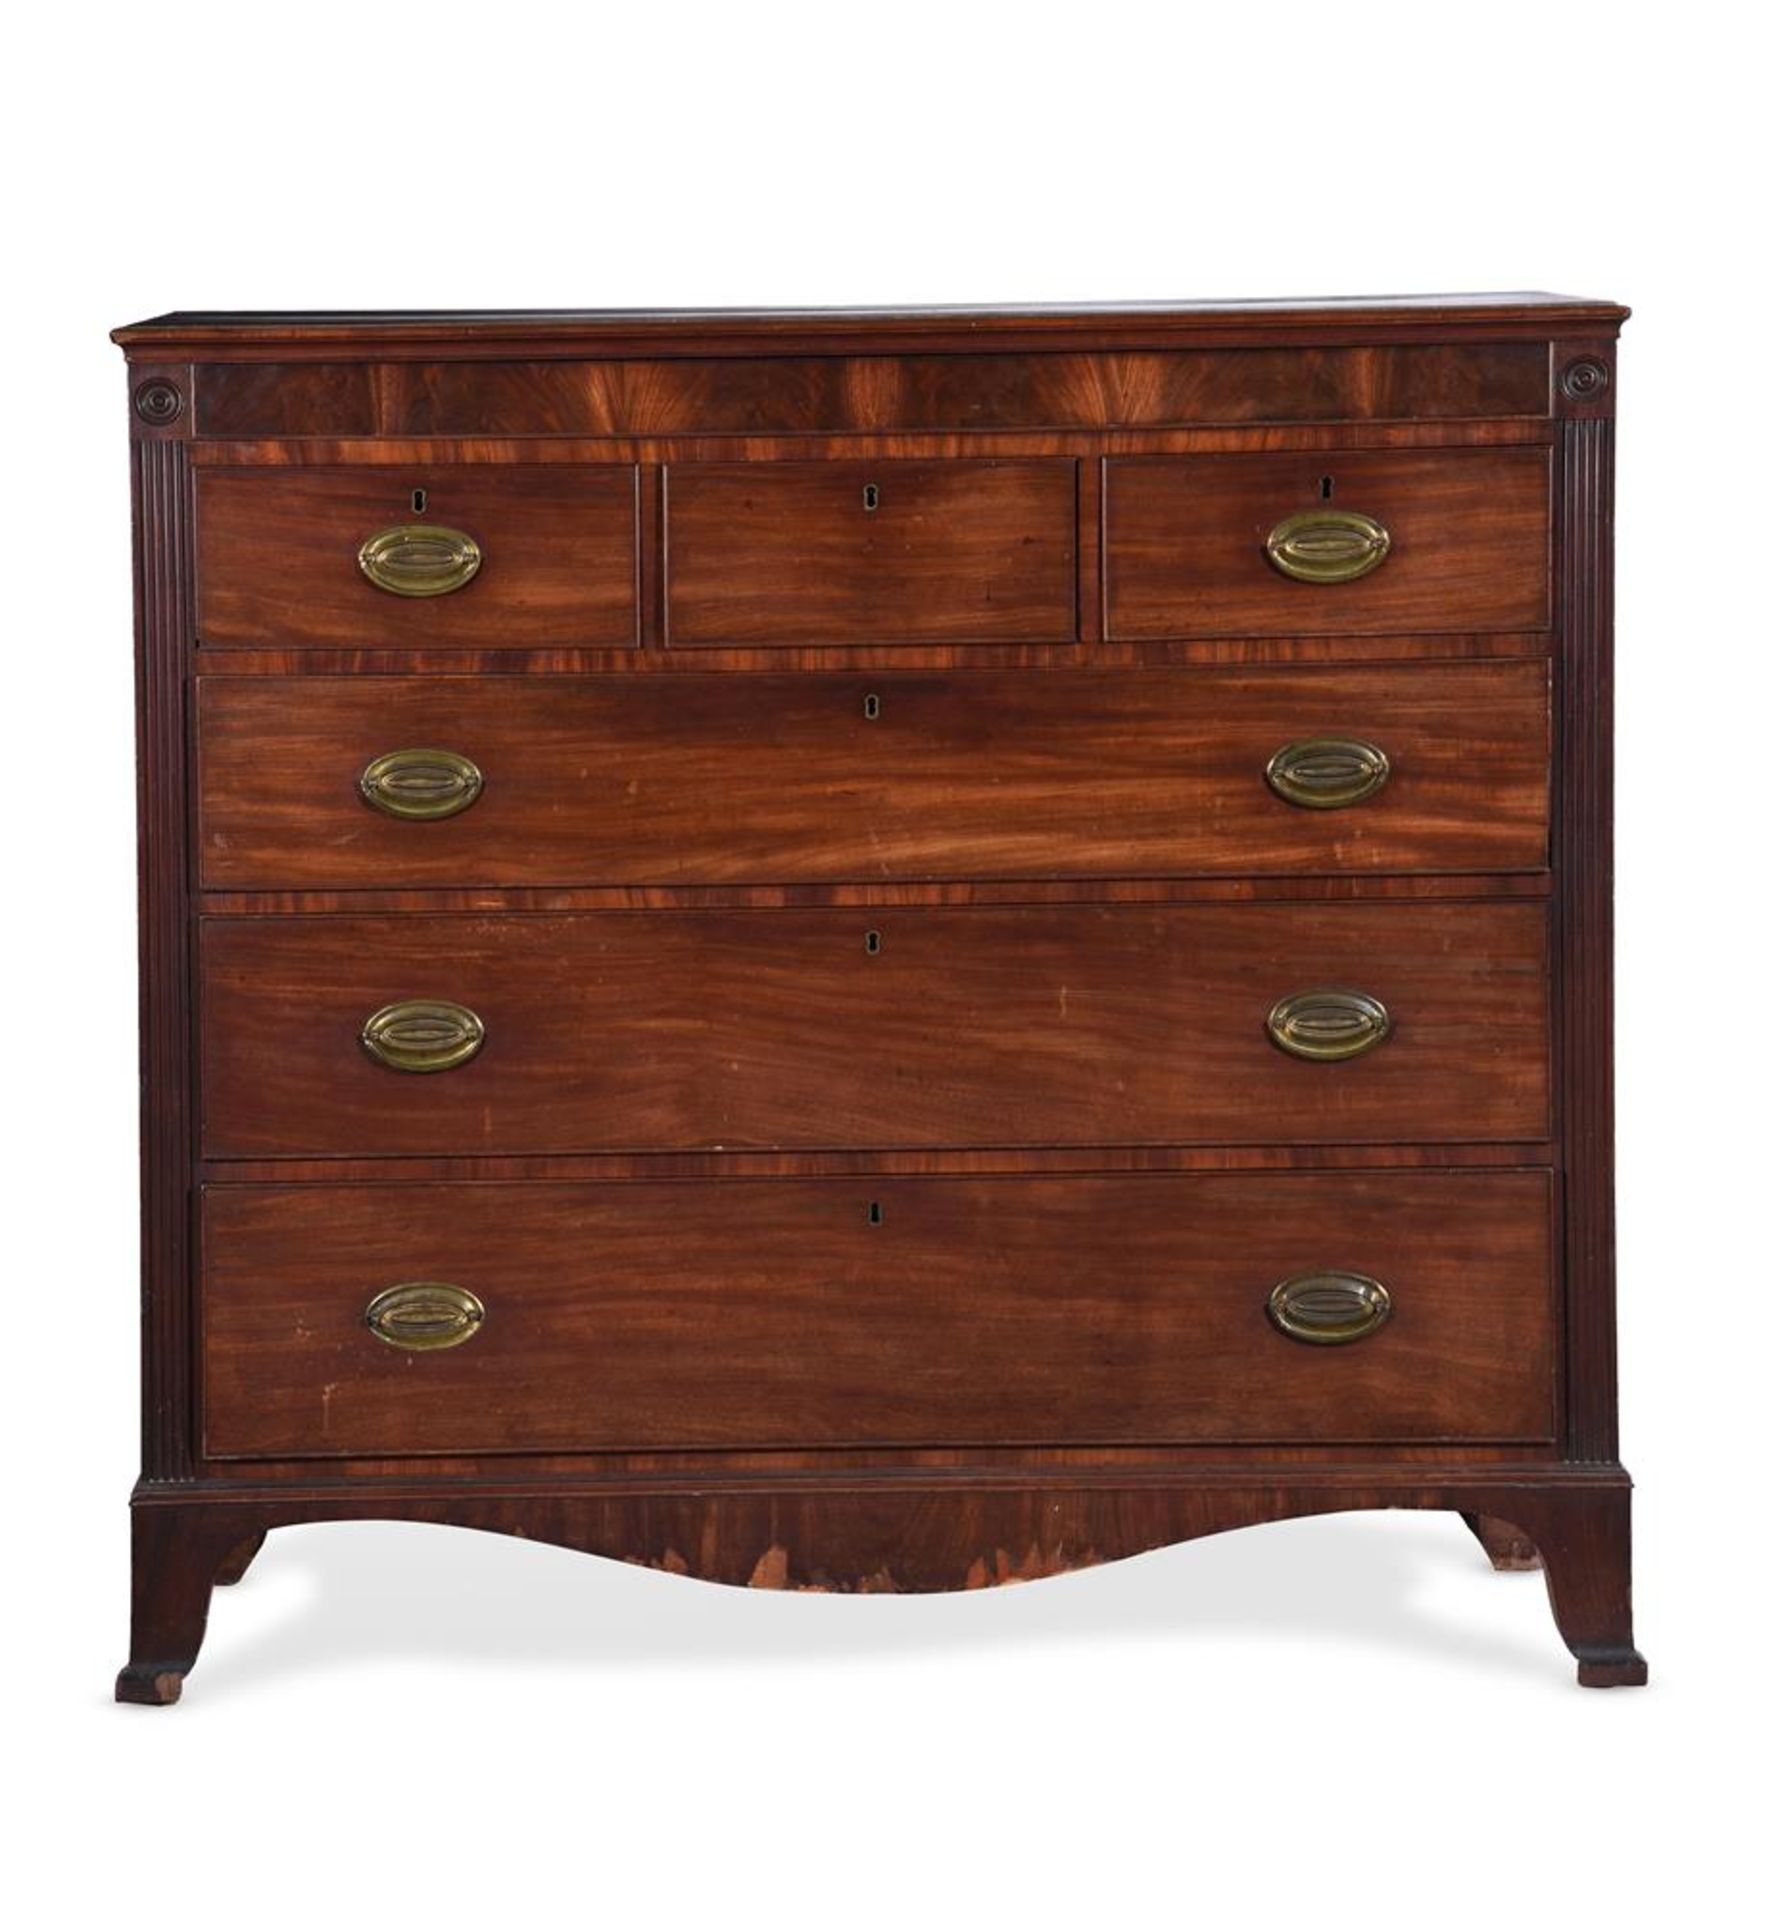 A GEORGE IV MAHOGANY CHEST OF DRAWERS